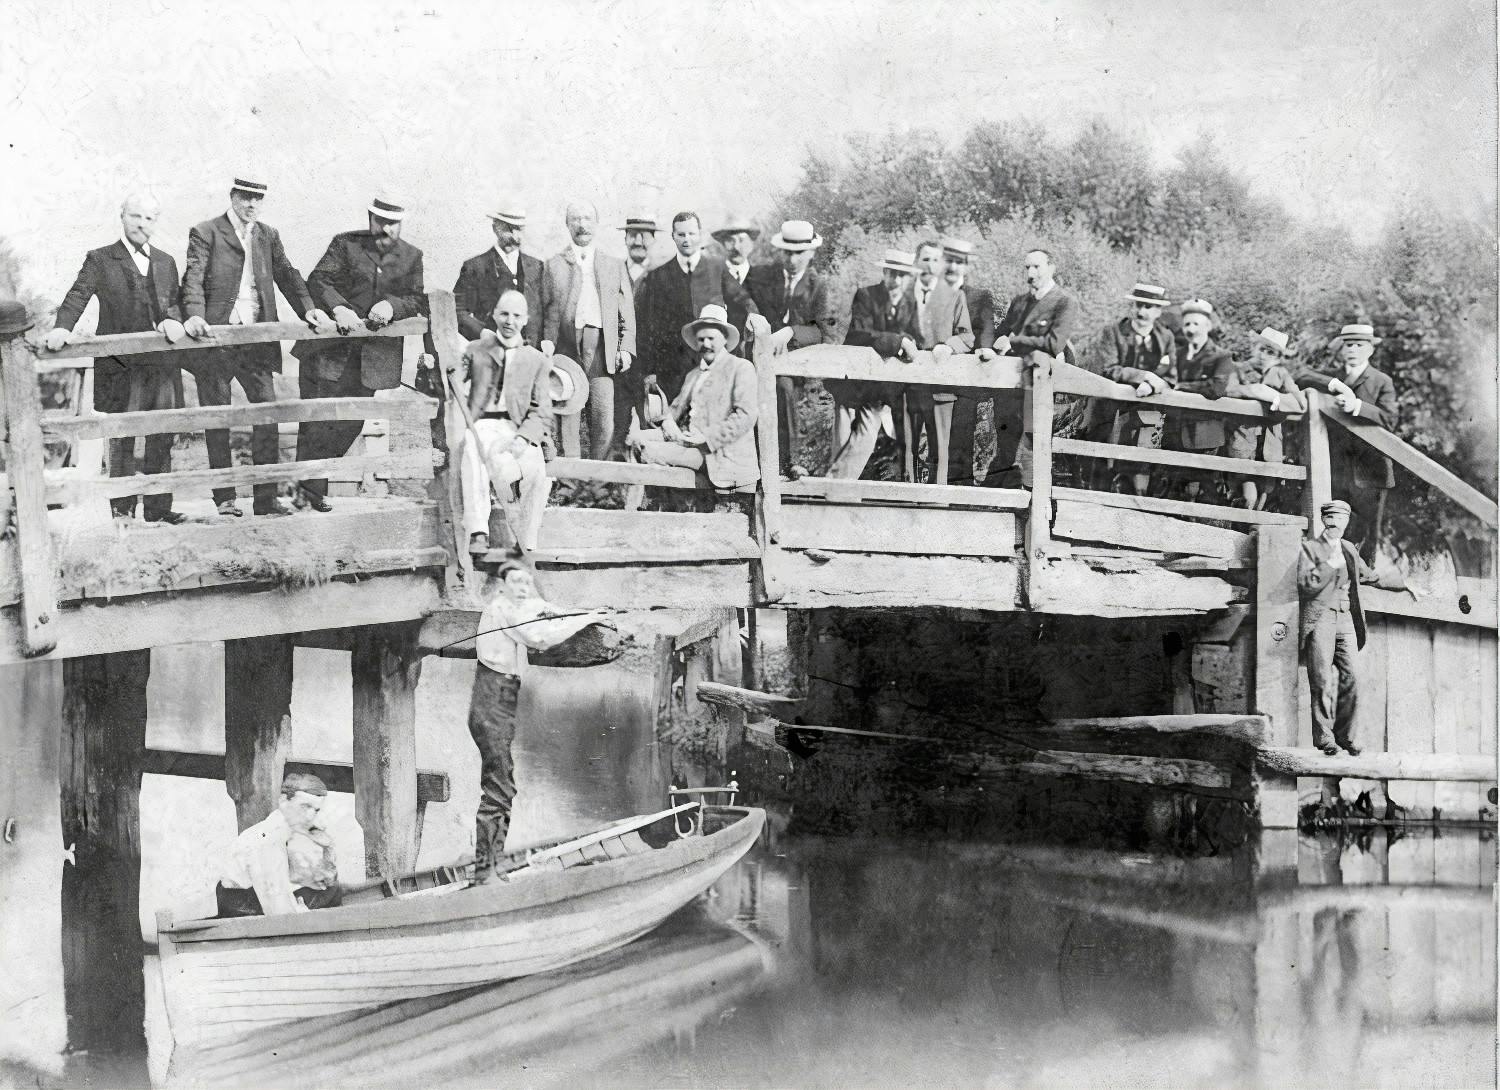 An Edwardian photograph of Ladies’s Bridge, which crossed from Lady Island to the Essex bank and collapsed in the 1930s.